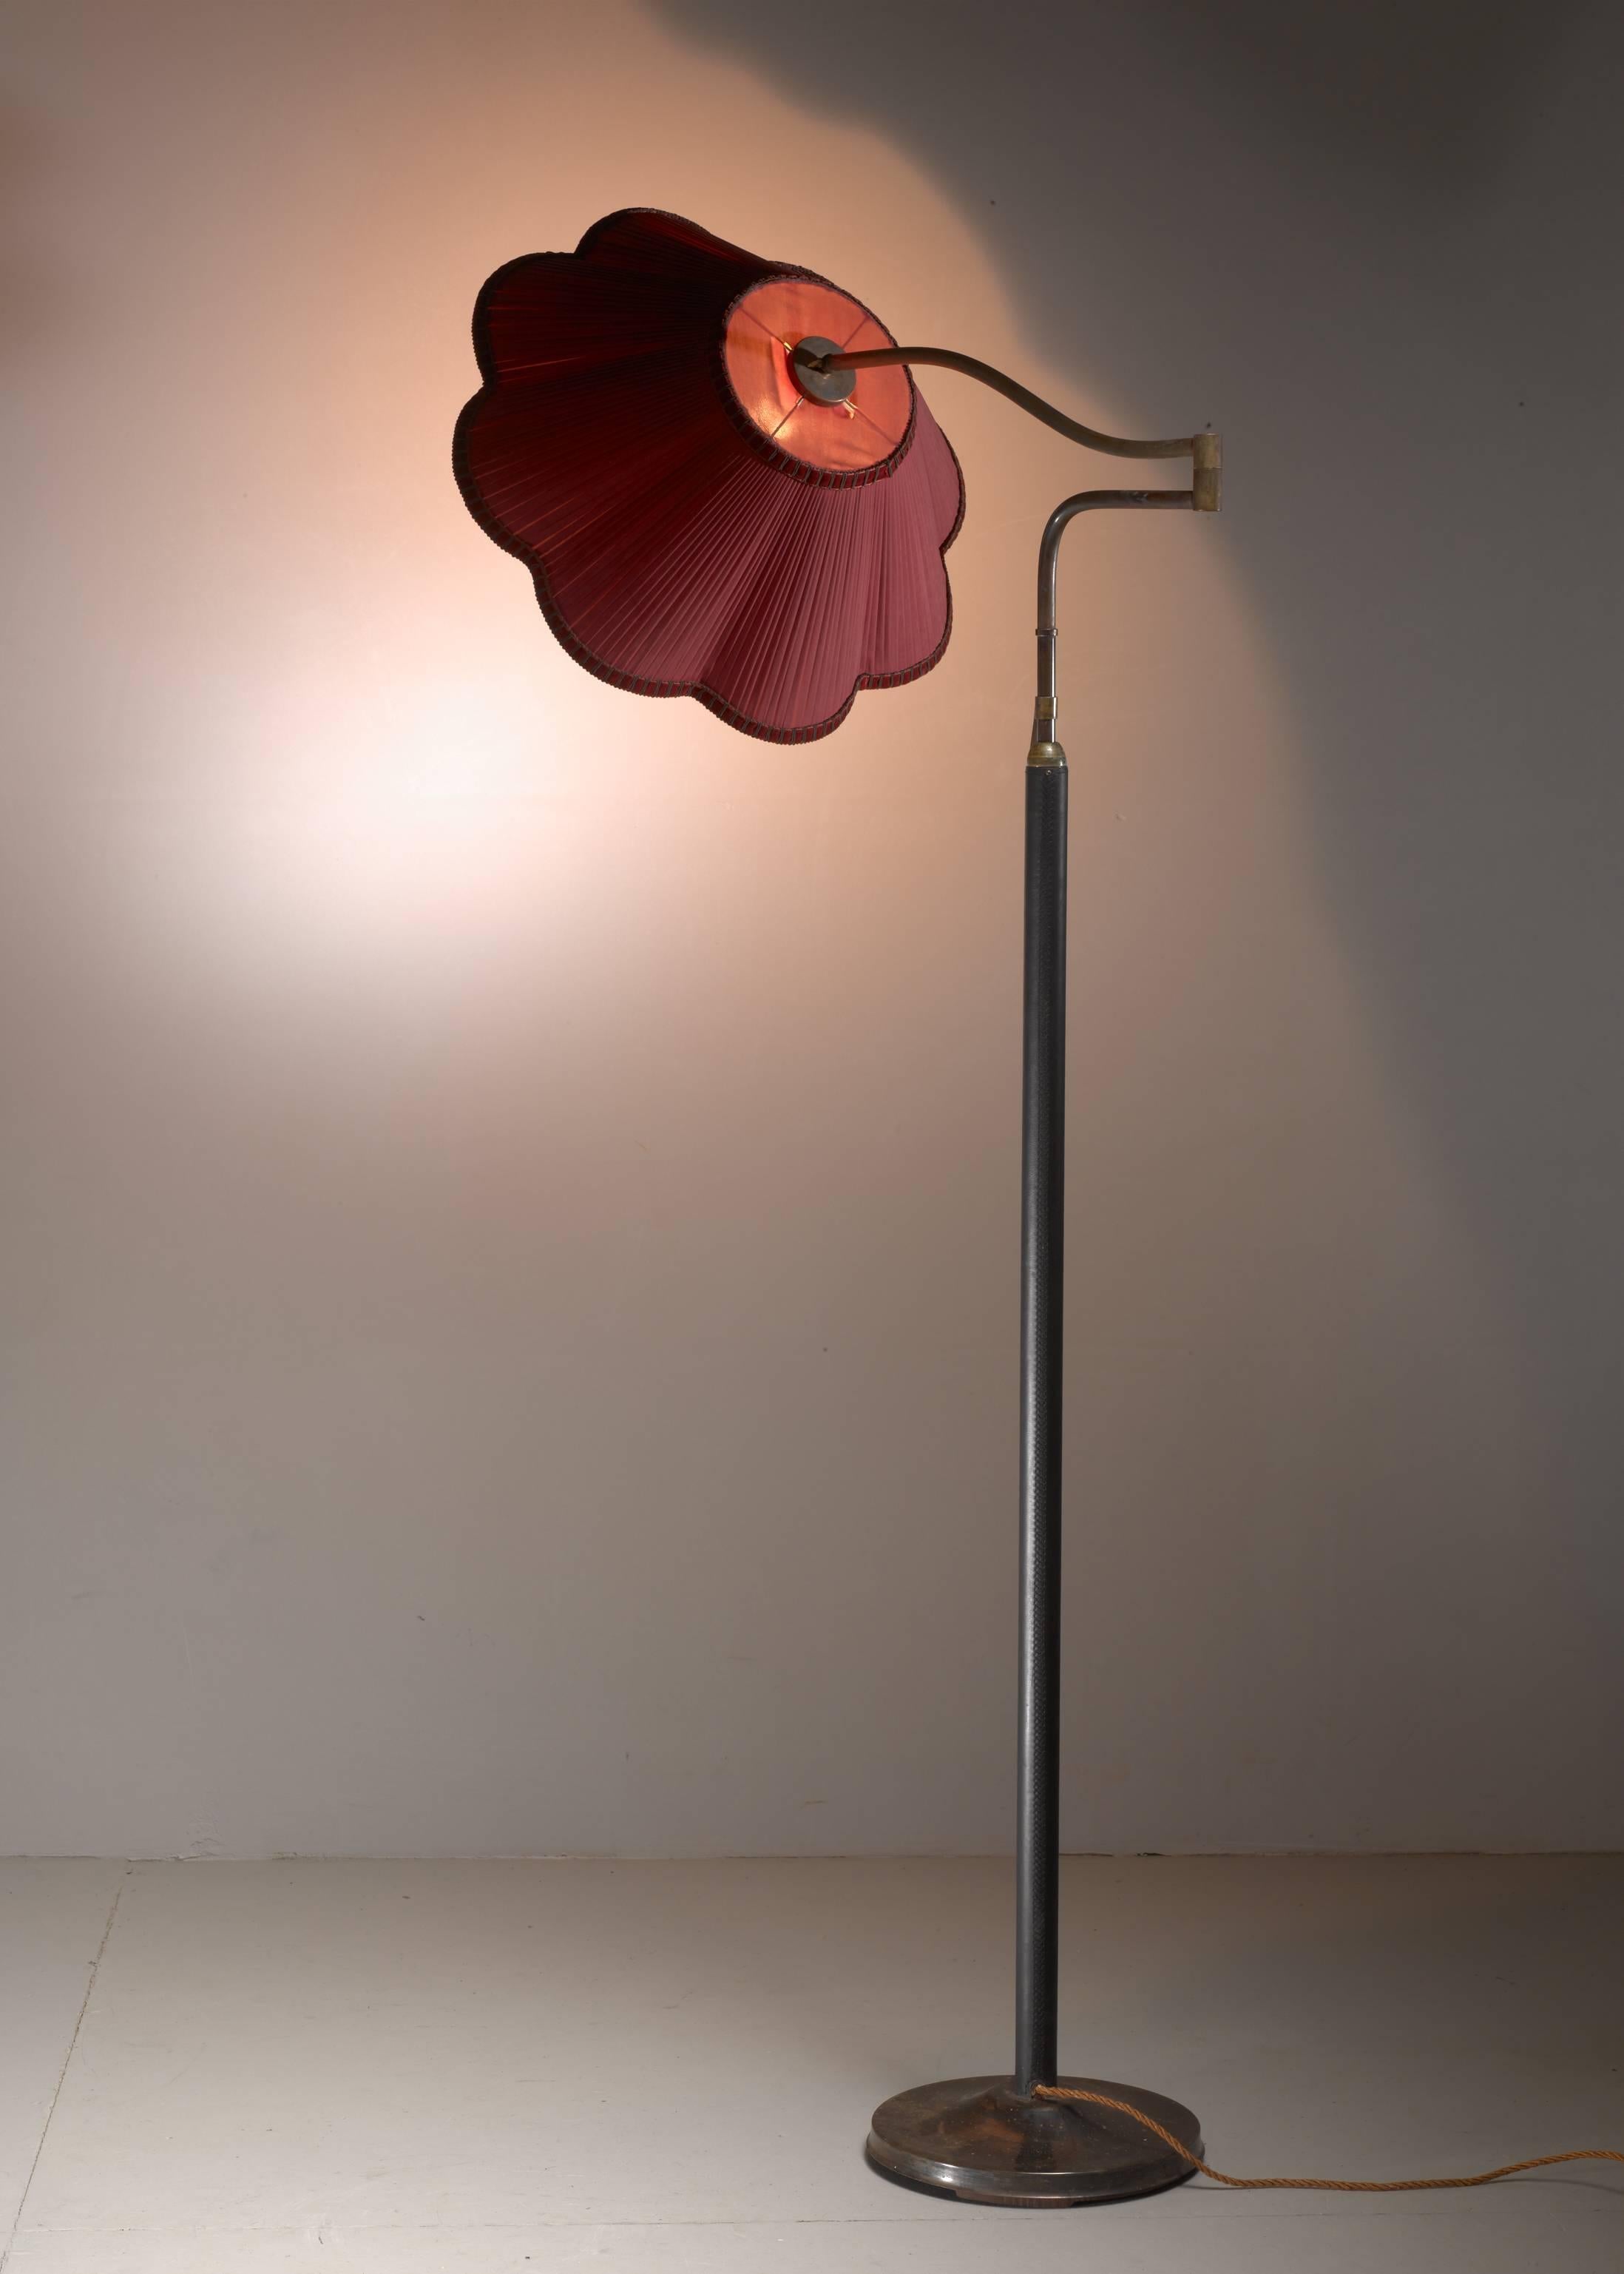 An Austria floor lamp attributed to Josef Frank for J.T. Kalmar, Austria. The lamp has a brass base and a brass stem with wood veneer. The lamp has a swiveling brass arm with a fabric hood. The lamp is height-adjustable between 157 and 190 cm (62